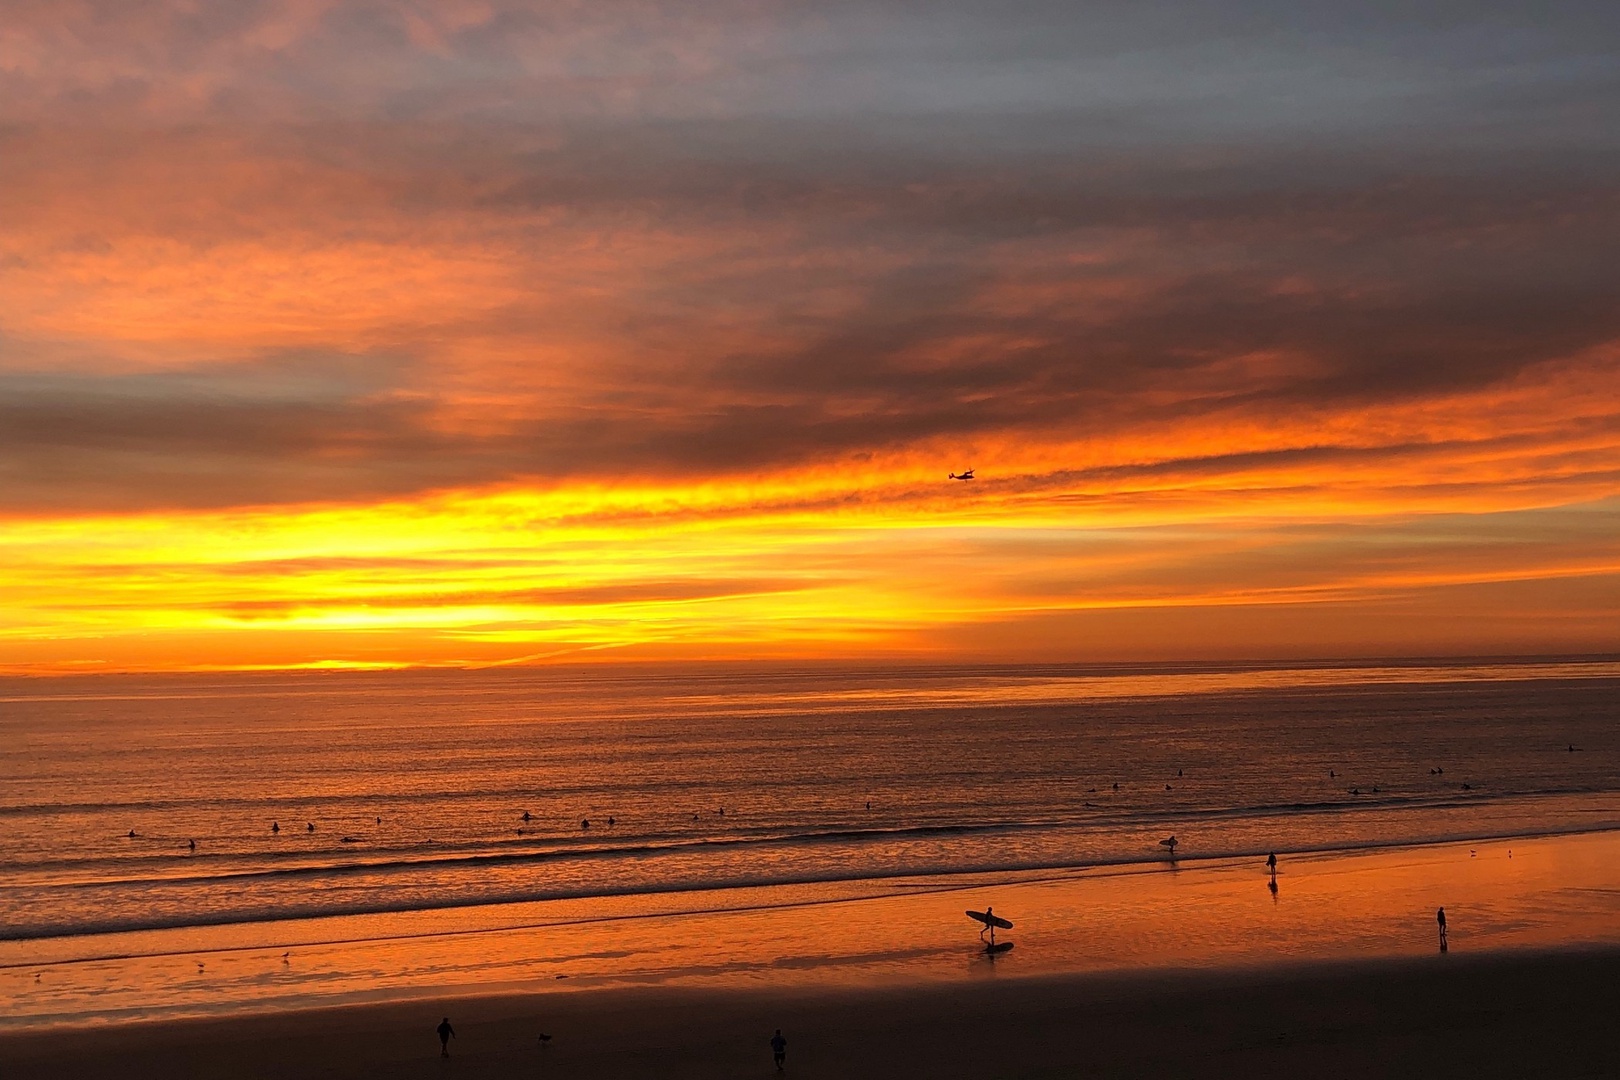 Another amazing Pacific Beach sunset